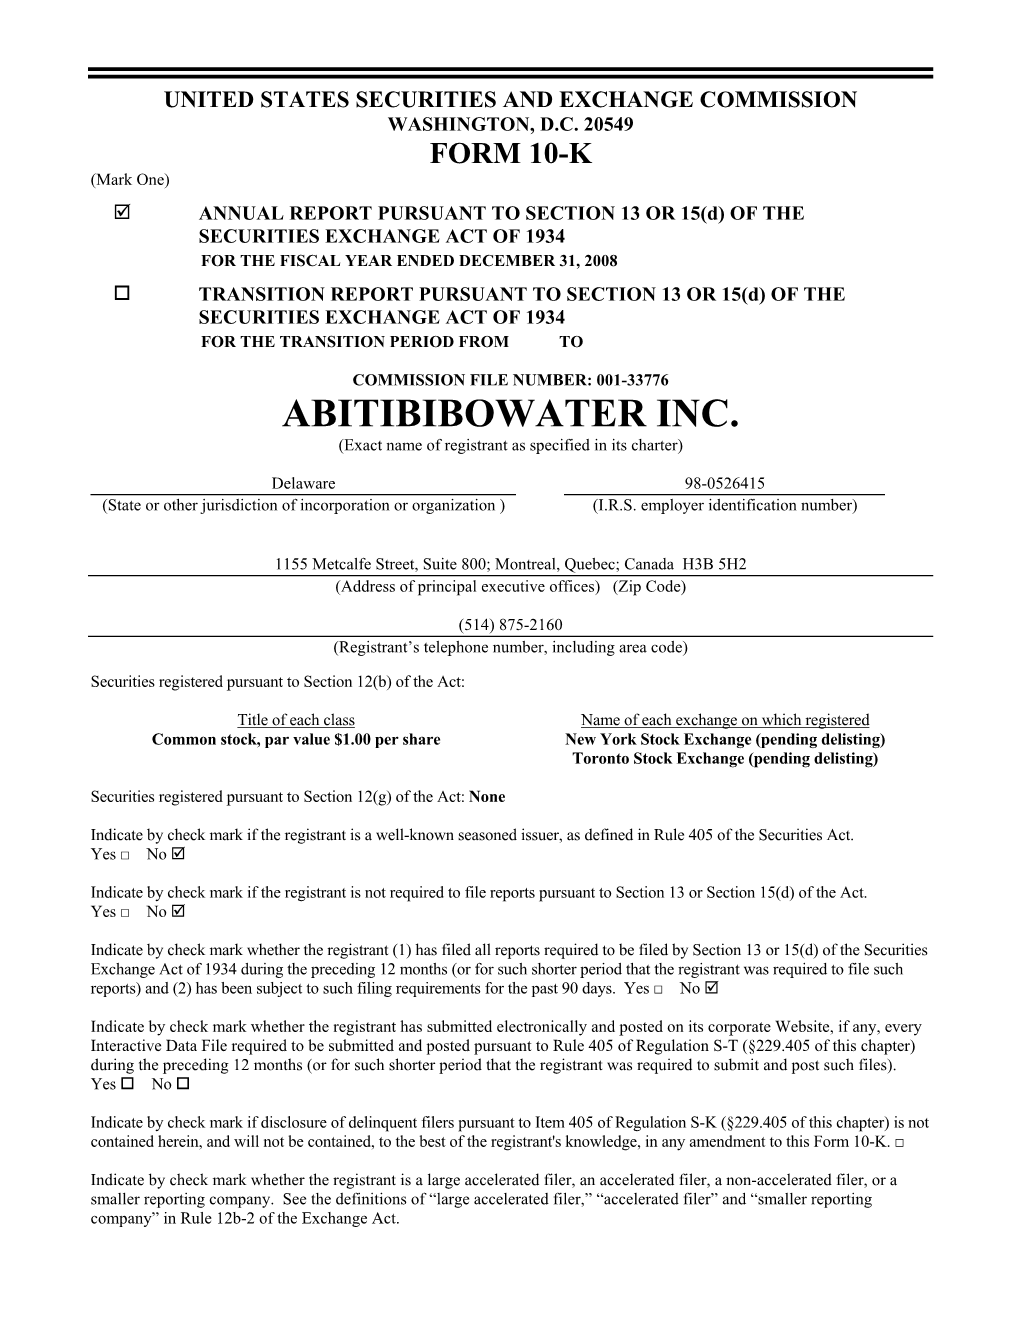 ABITIBIBOWATER INC. (Exact Name of Registrant As Specified in Its Charter)